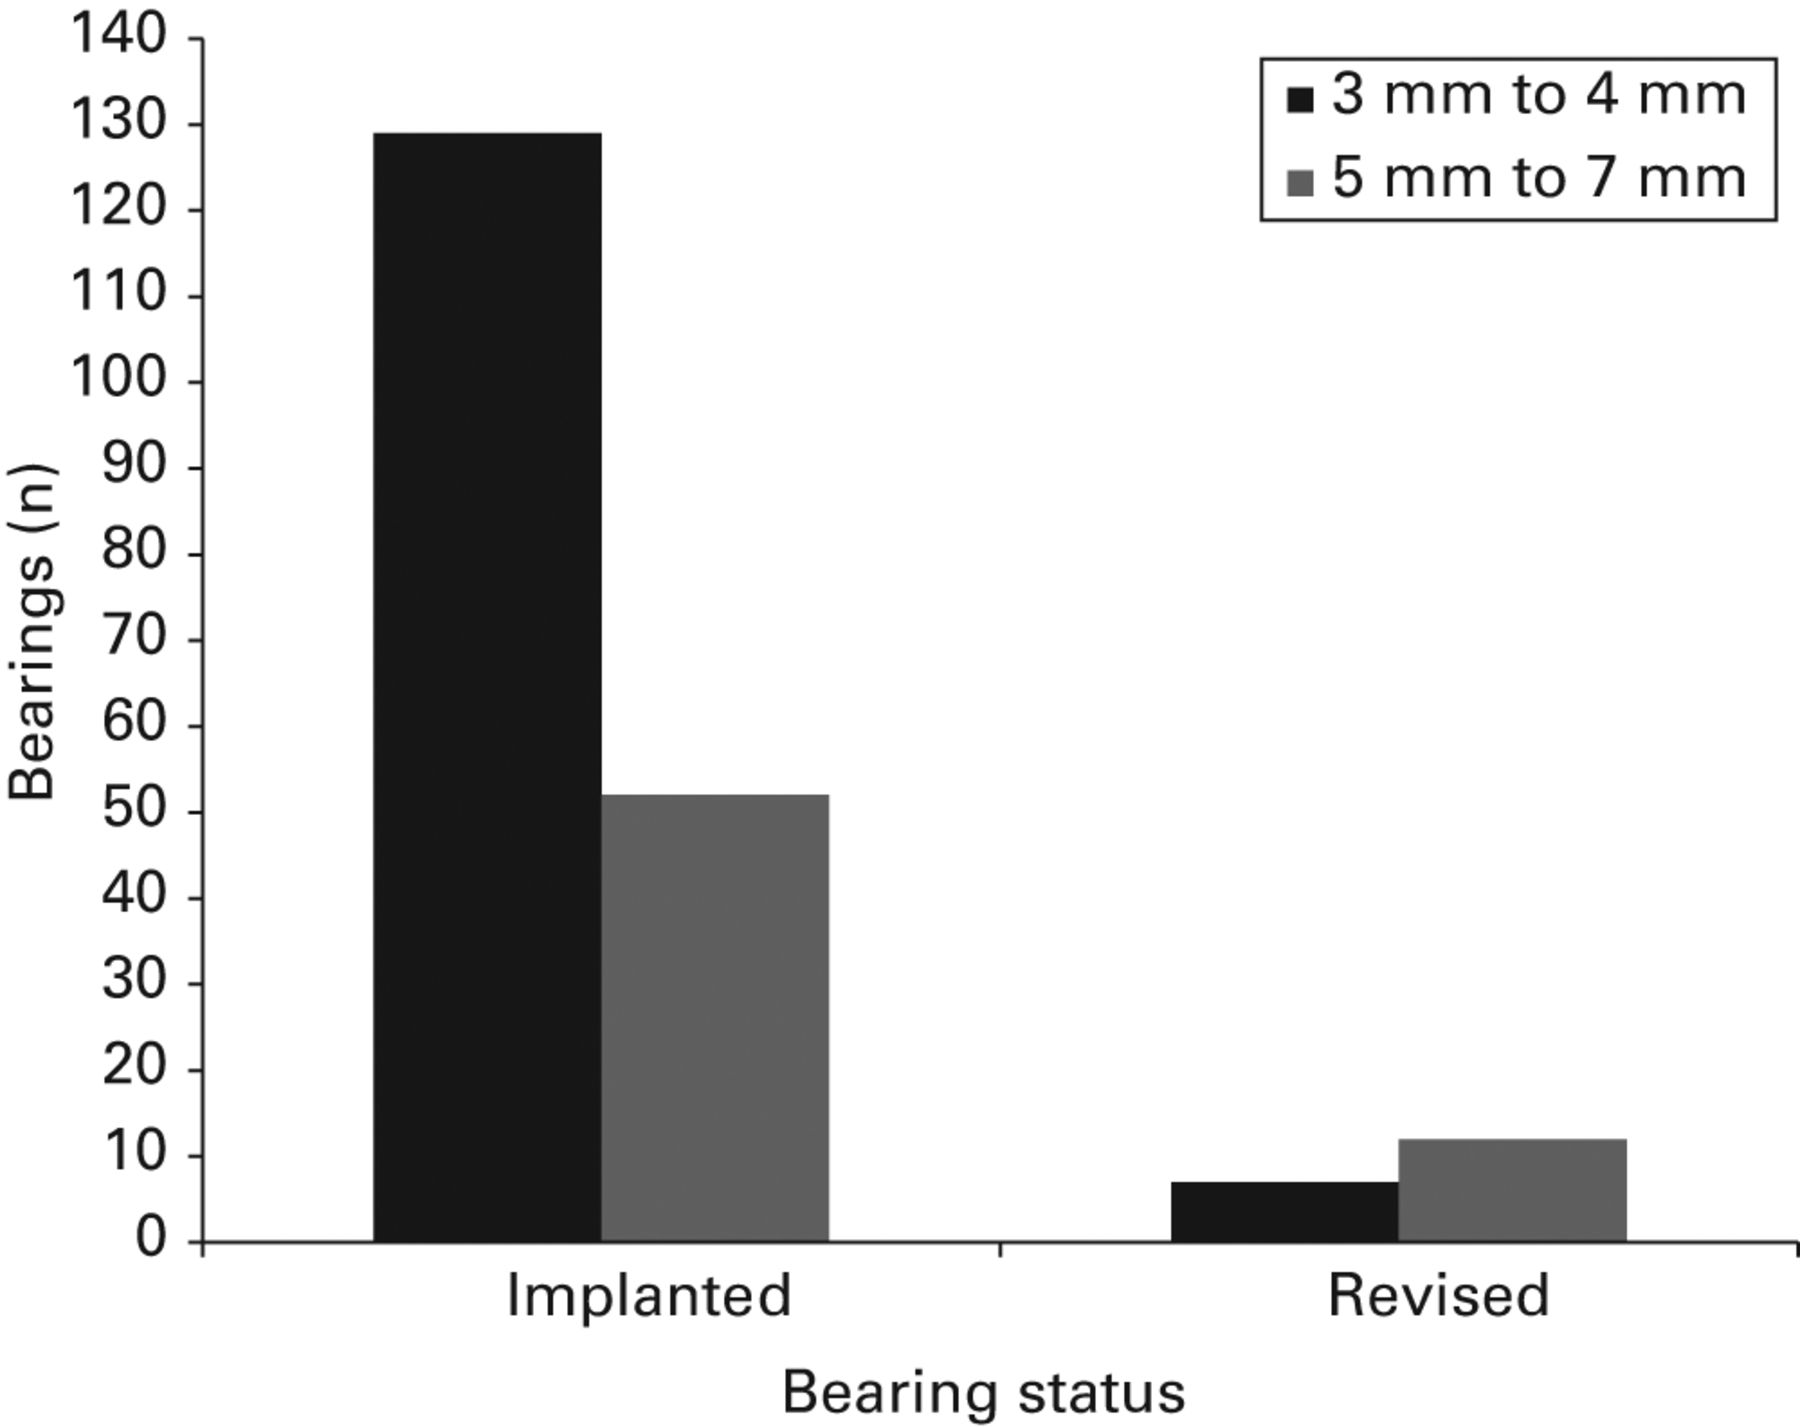 Fig. 4 
            Bearing thickness implanted versus revised:
bar chart demonstrating total number of bearings implanted and revised,
for thin (3 mm to 4 mm) and thick (5 mm to 7 mm) bearings.
          